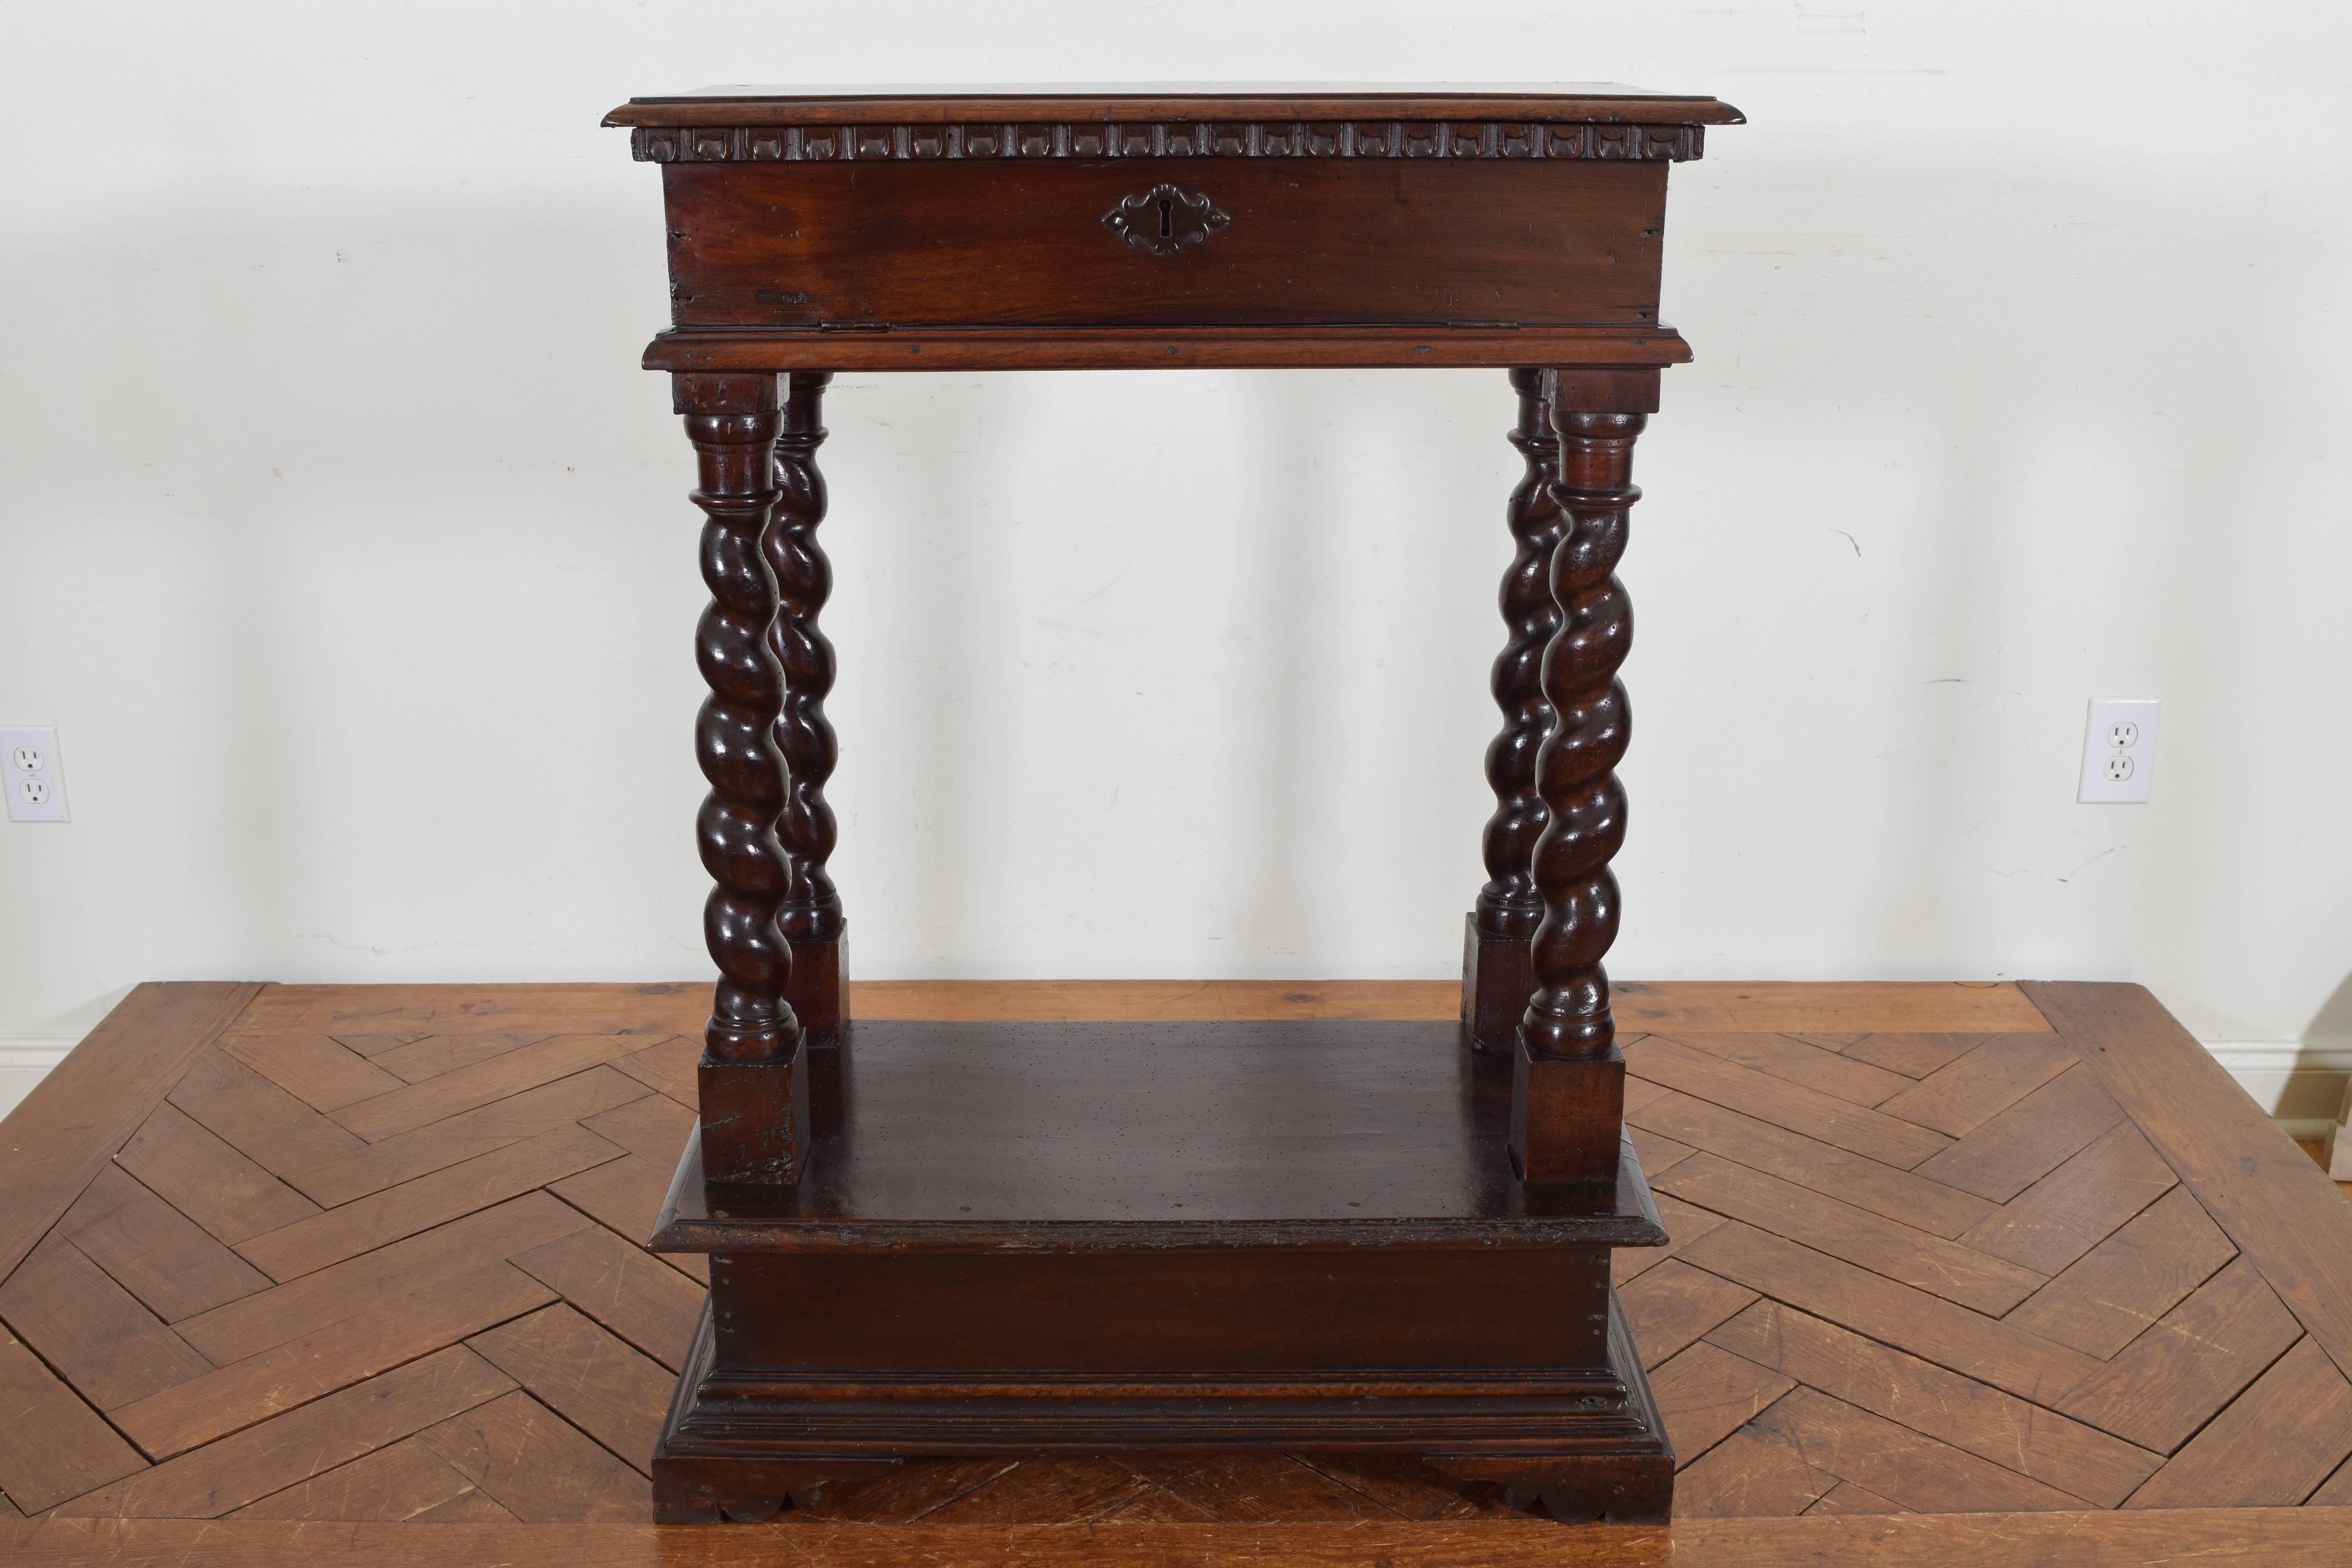 The rectangular top with dentile molding above a conforming case with flip down front revealing a storage area, raised on spiral carved supports with block feet, the whole raised on a plinth-form base.